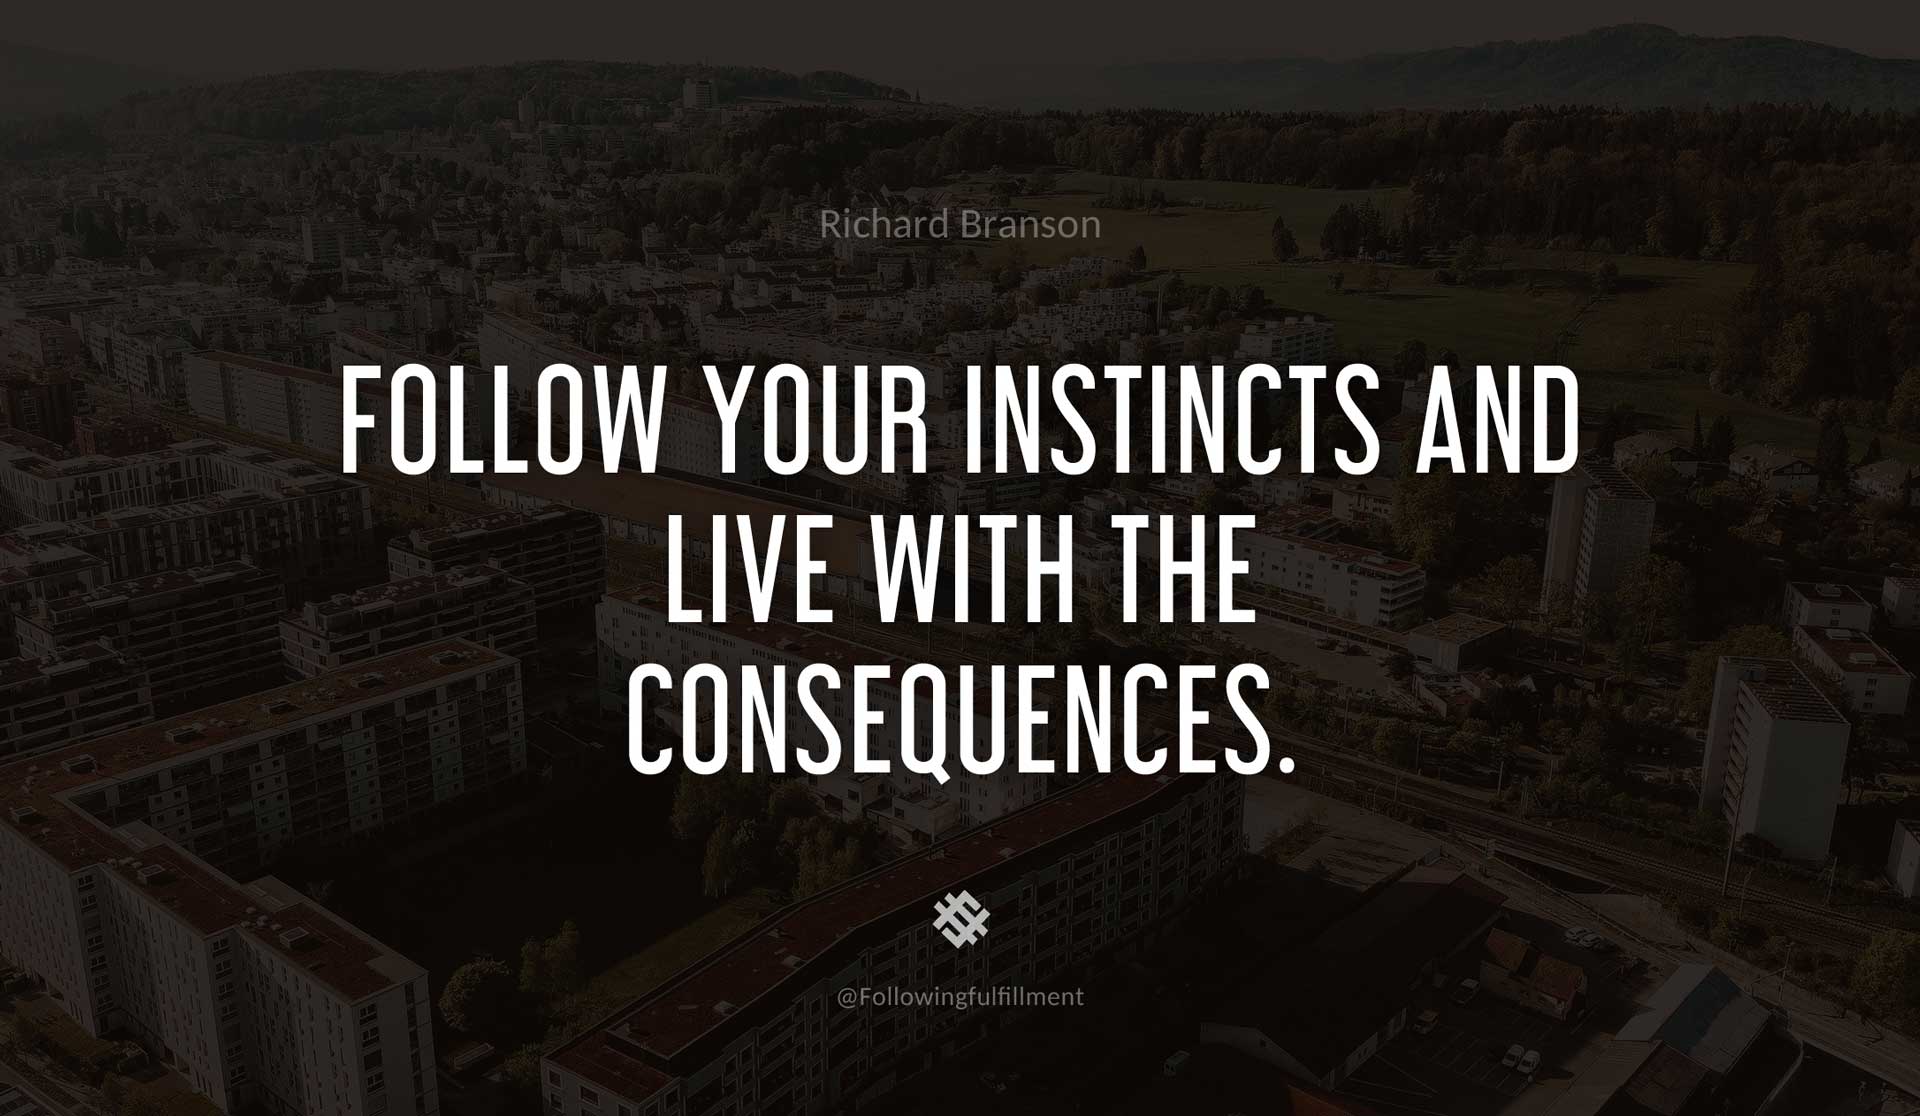 Follow-your-instincts-and-live-with-the-consequences.-RICHARD-BRANSON-Quote.jpg